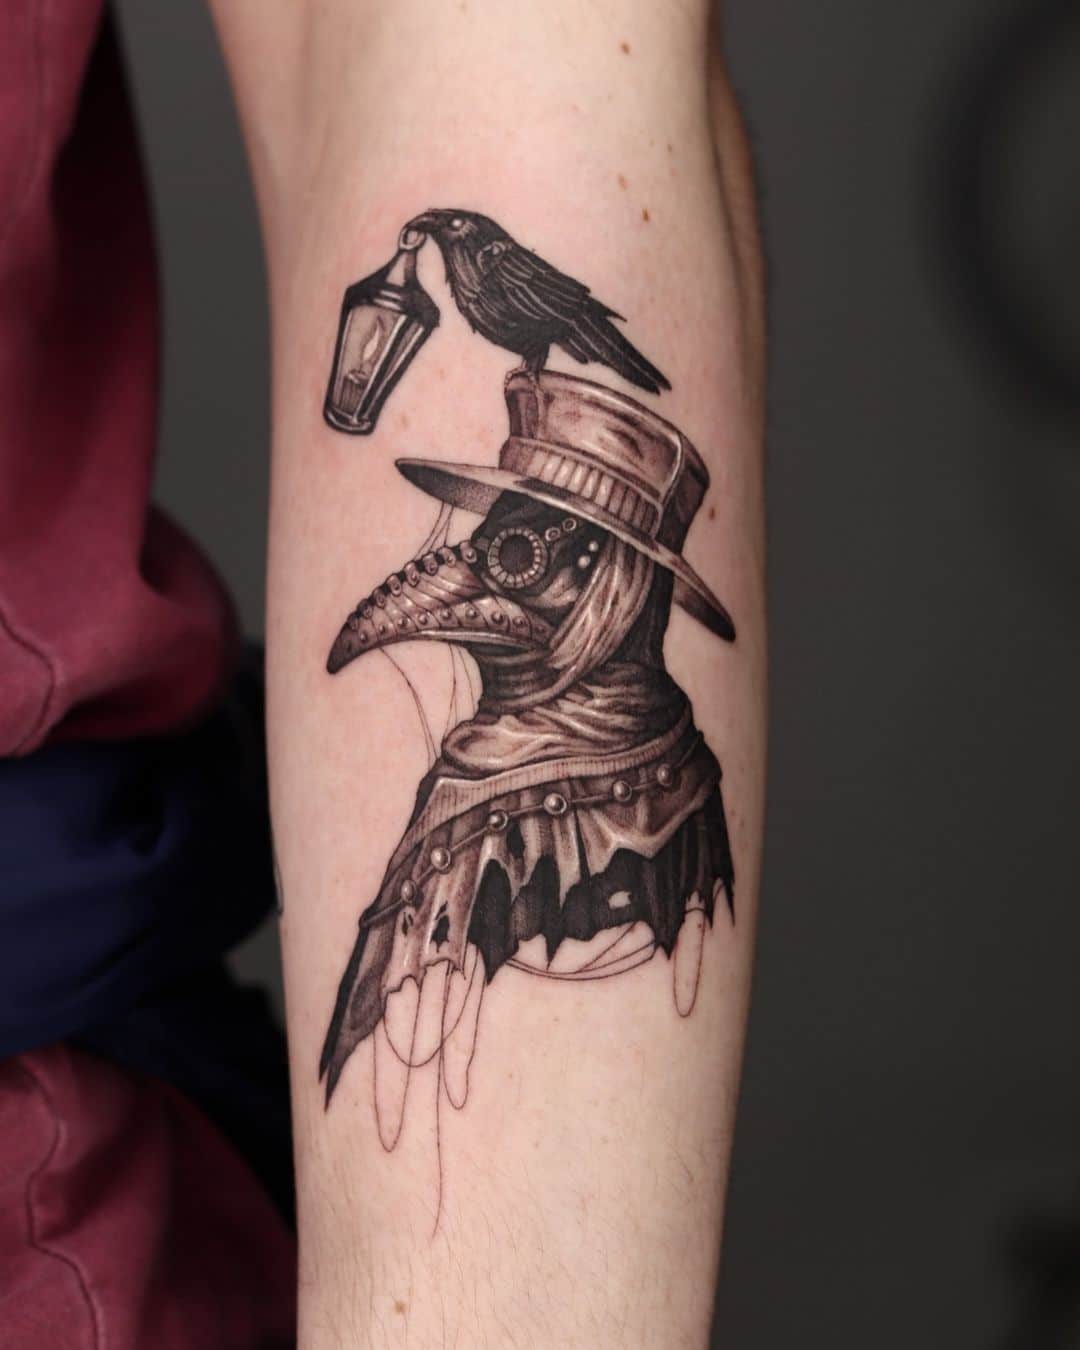 plague-doctor-tattoo-realistic-style-black-and-gray-apso